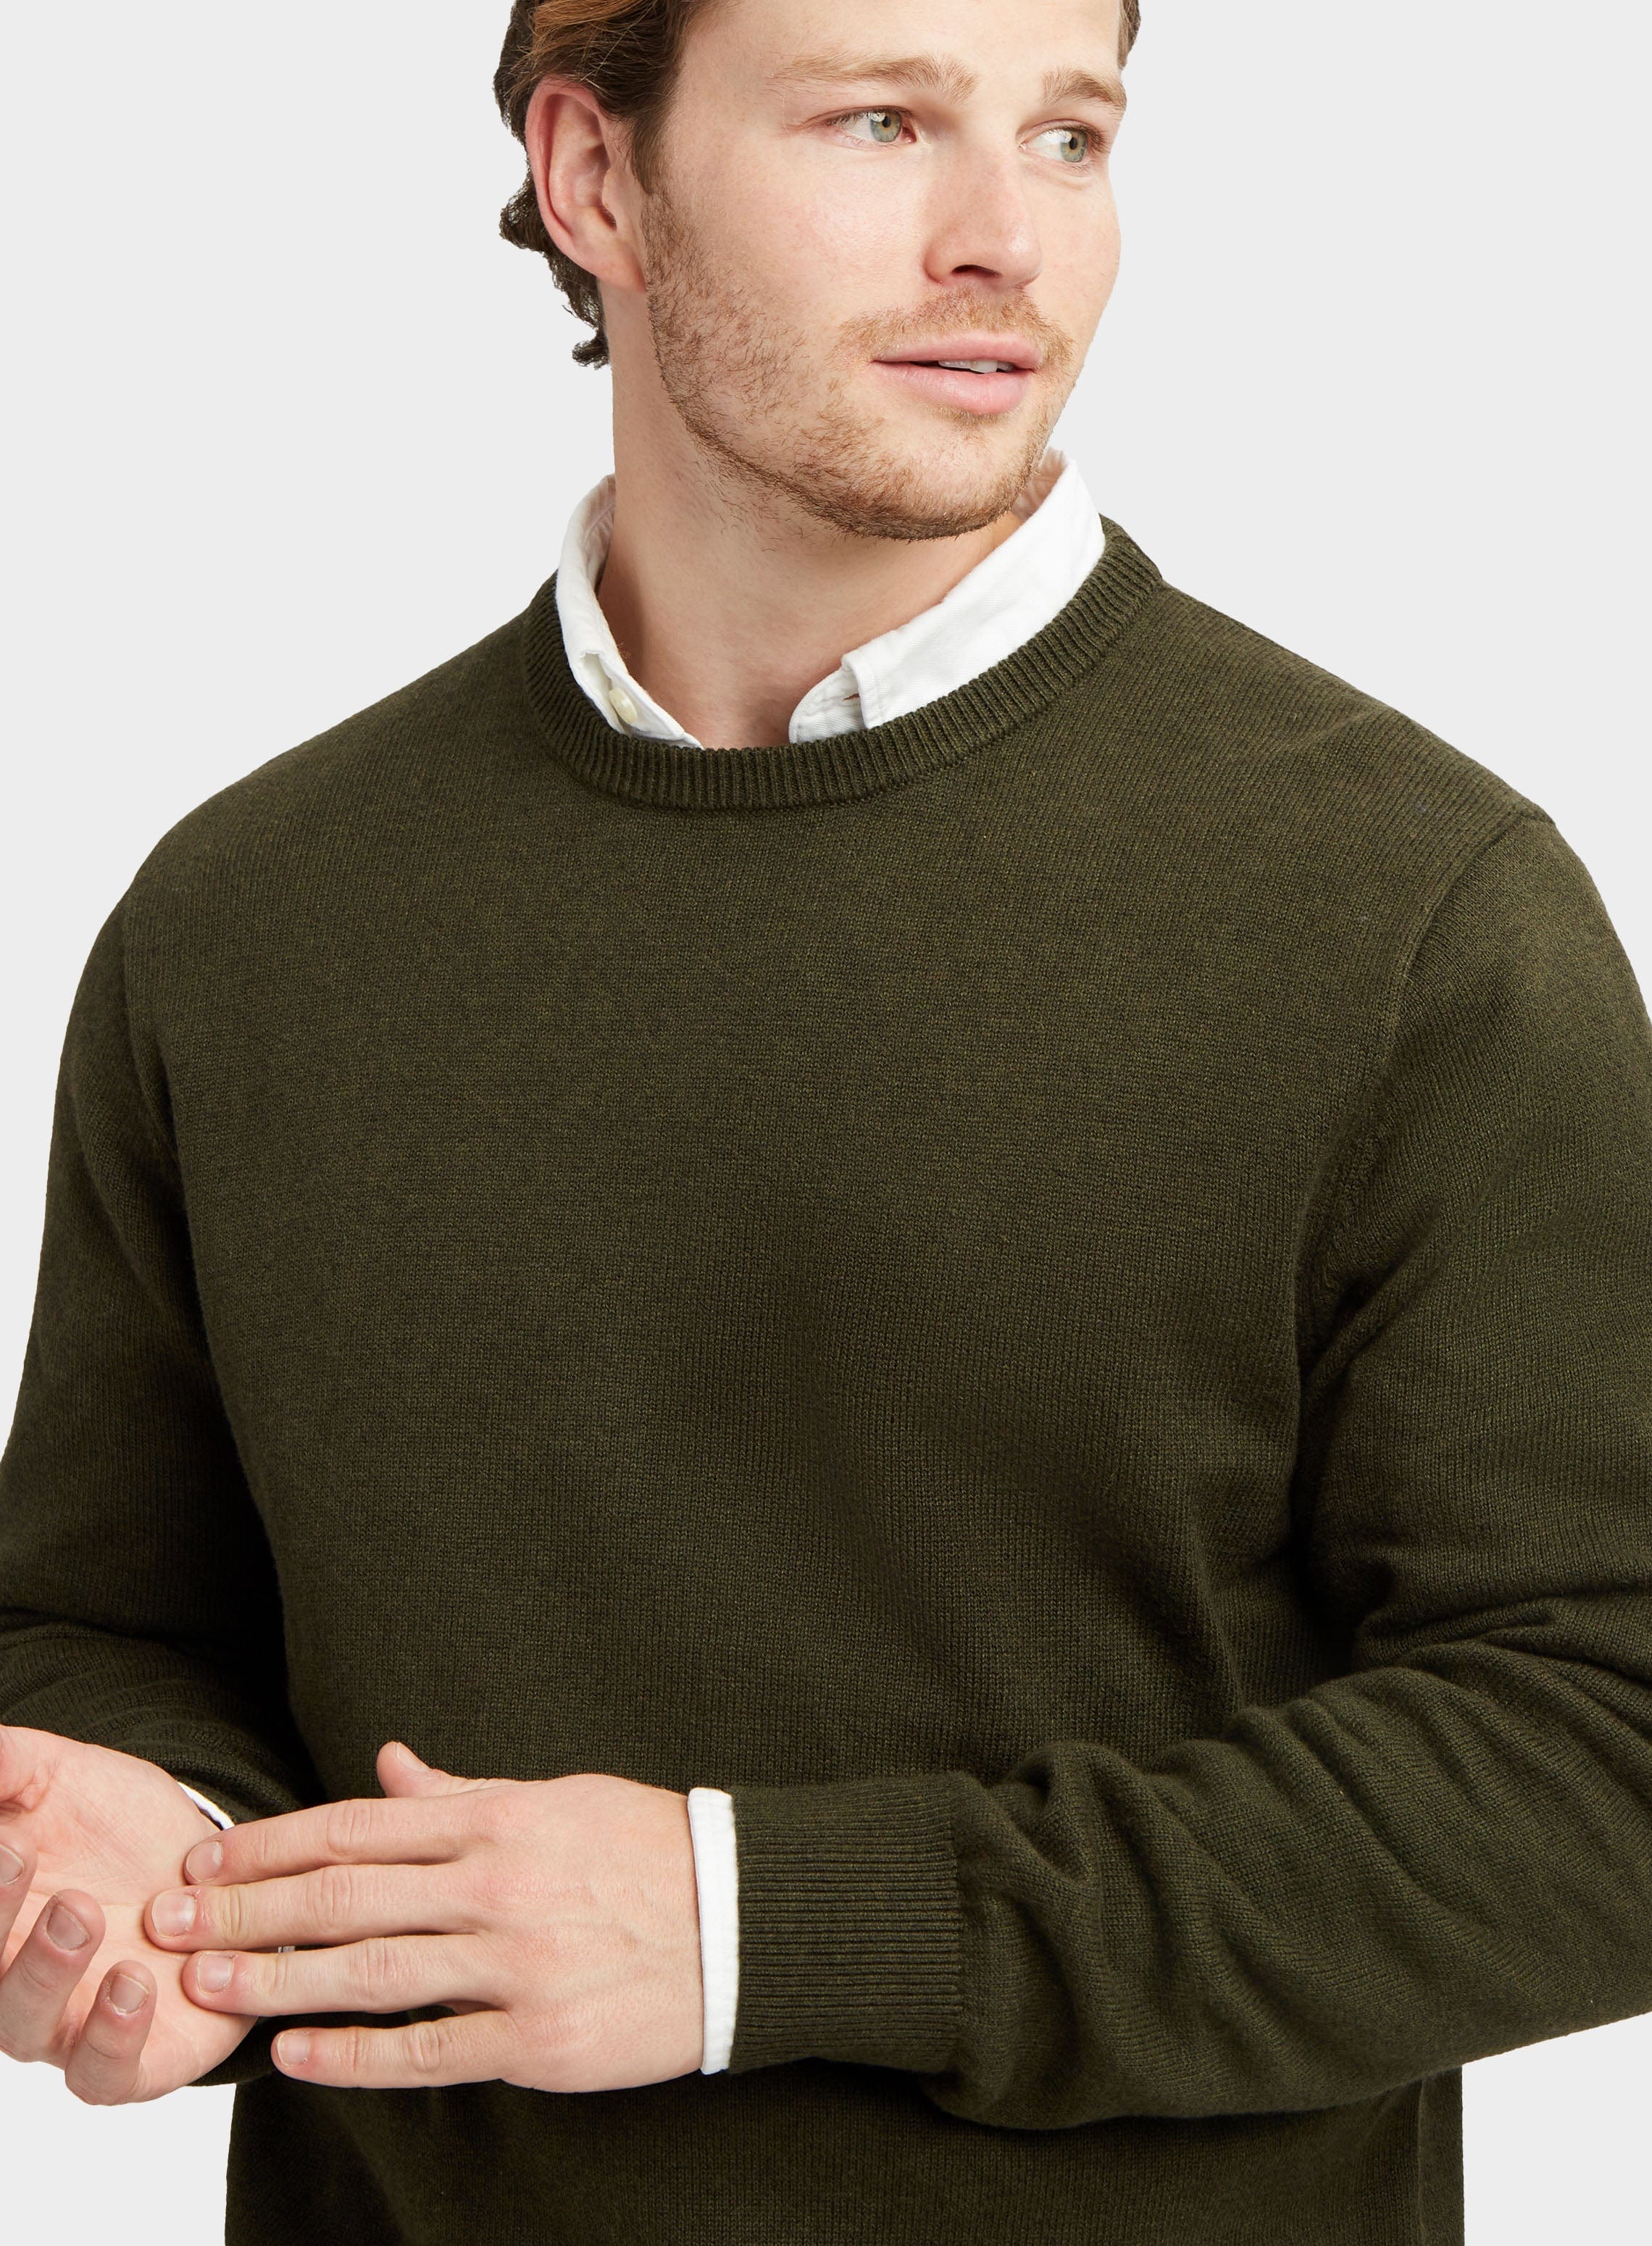 Mens Cotton Cashmere Crew Neck Jumper in Olive - Oxford Shirt Co.